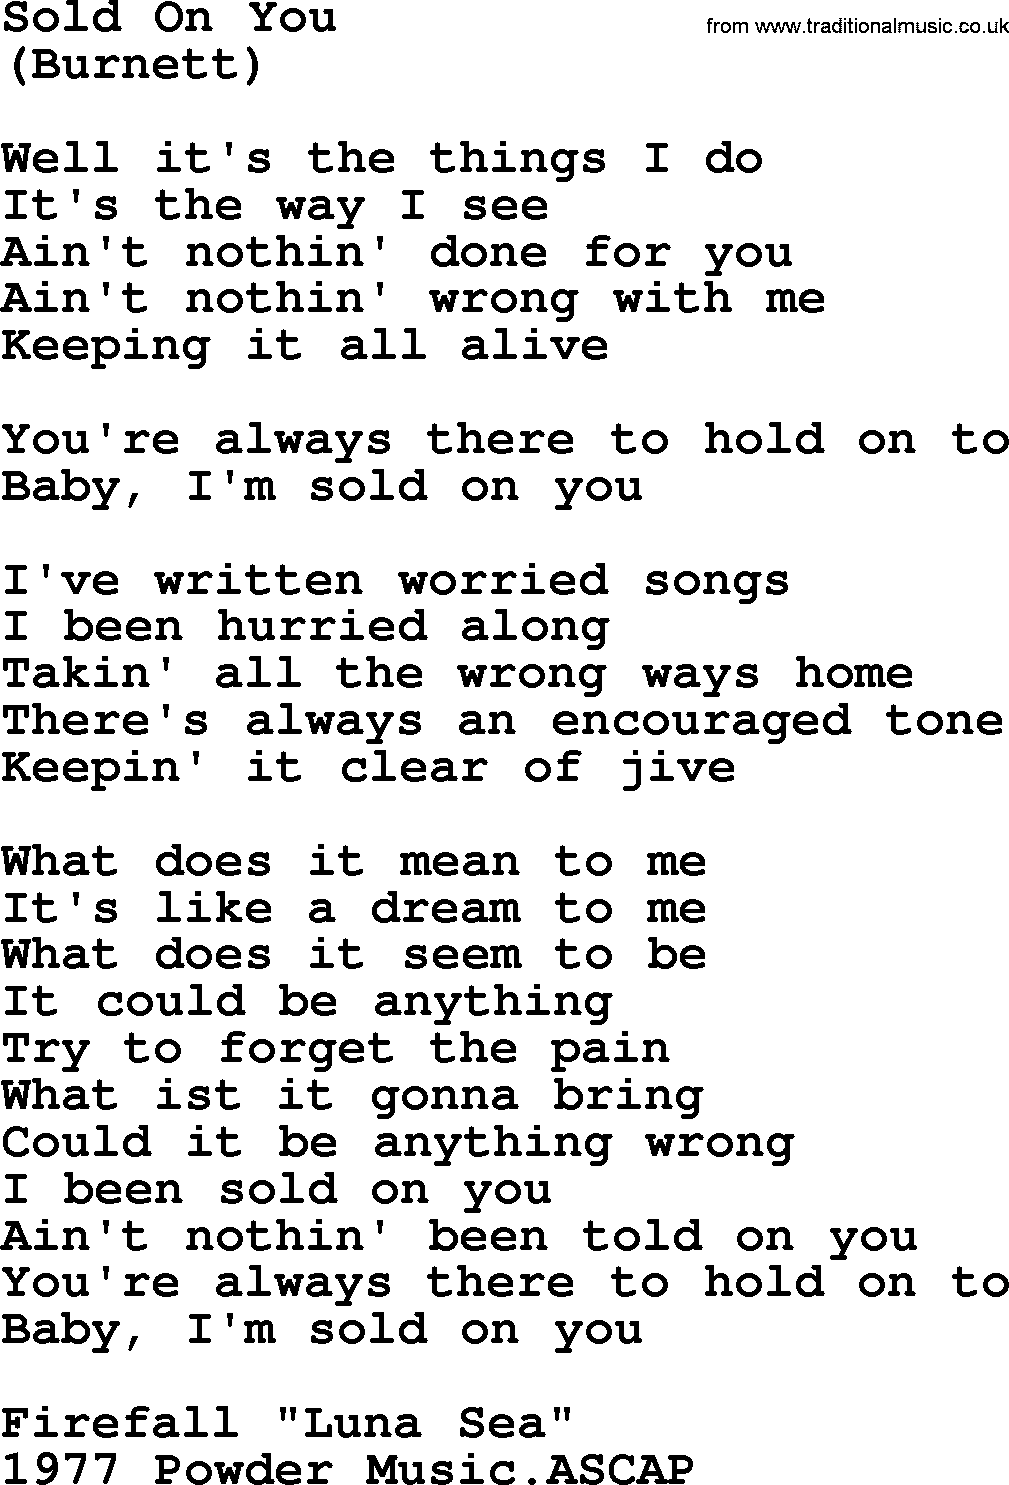 The Byrds song Sold On You, lyrics